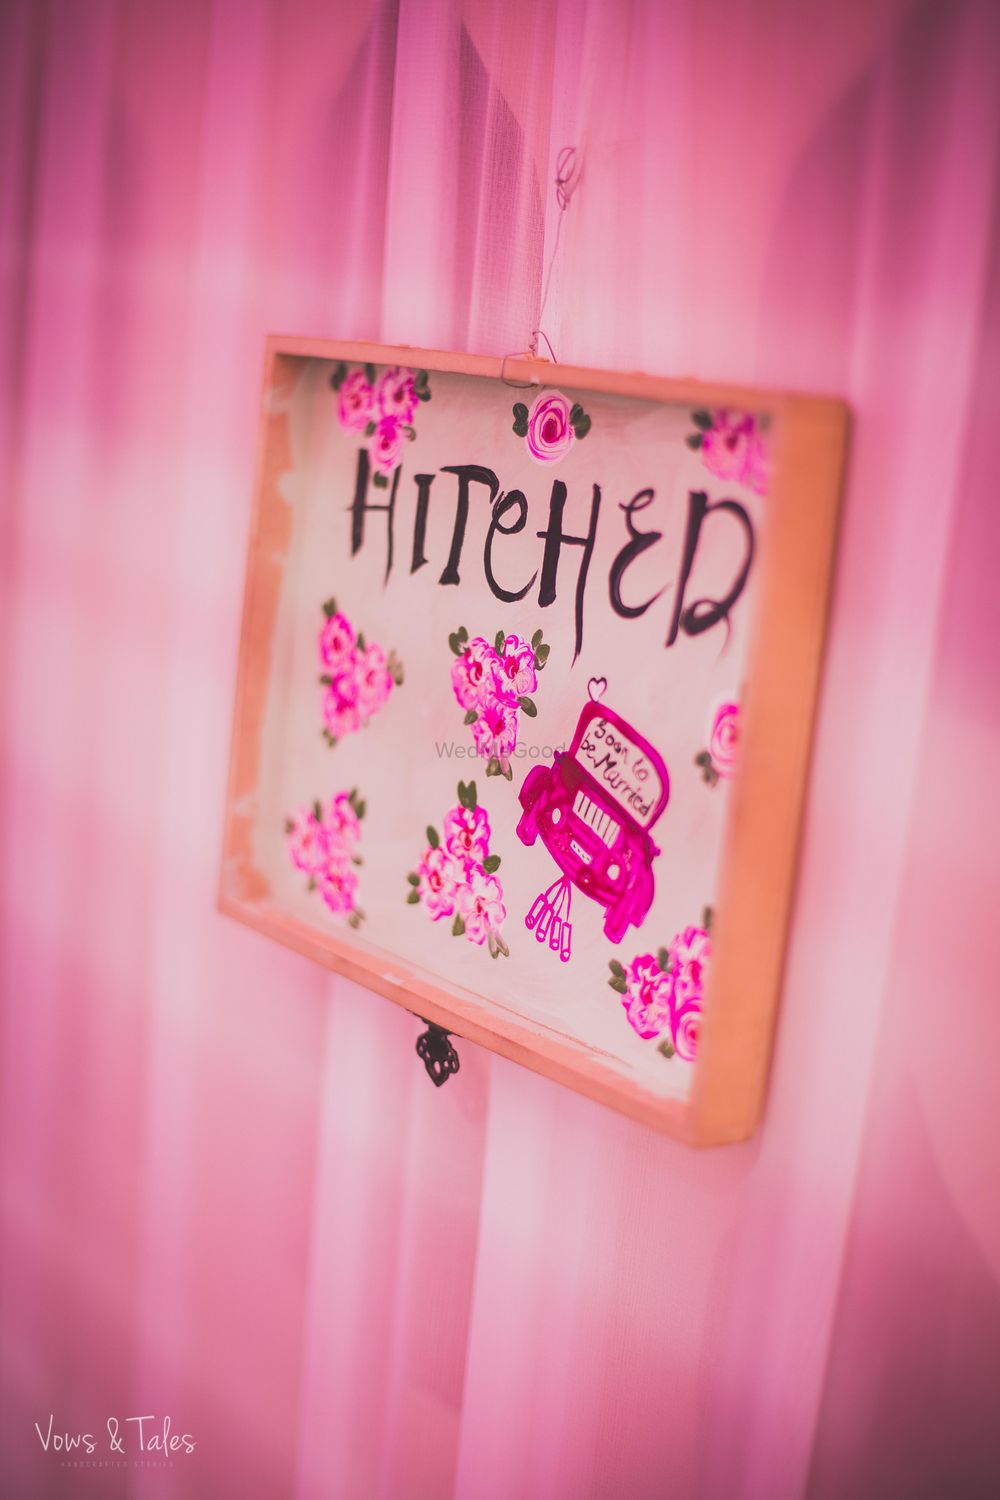 Photo of Pretty pink hitched message board in decor